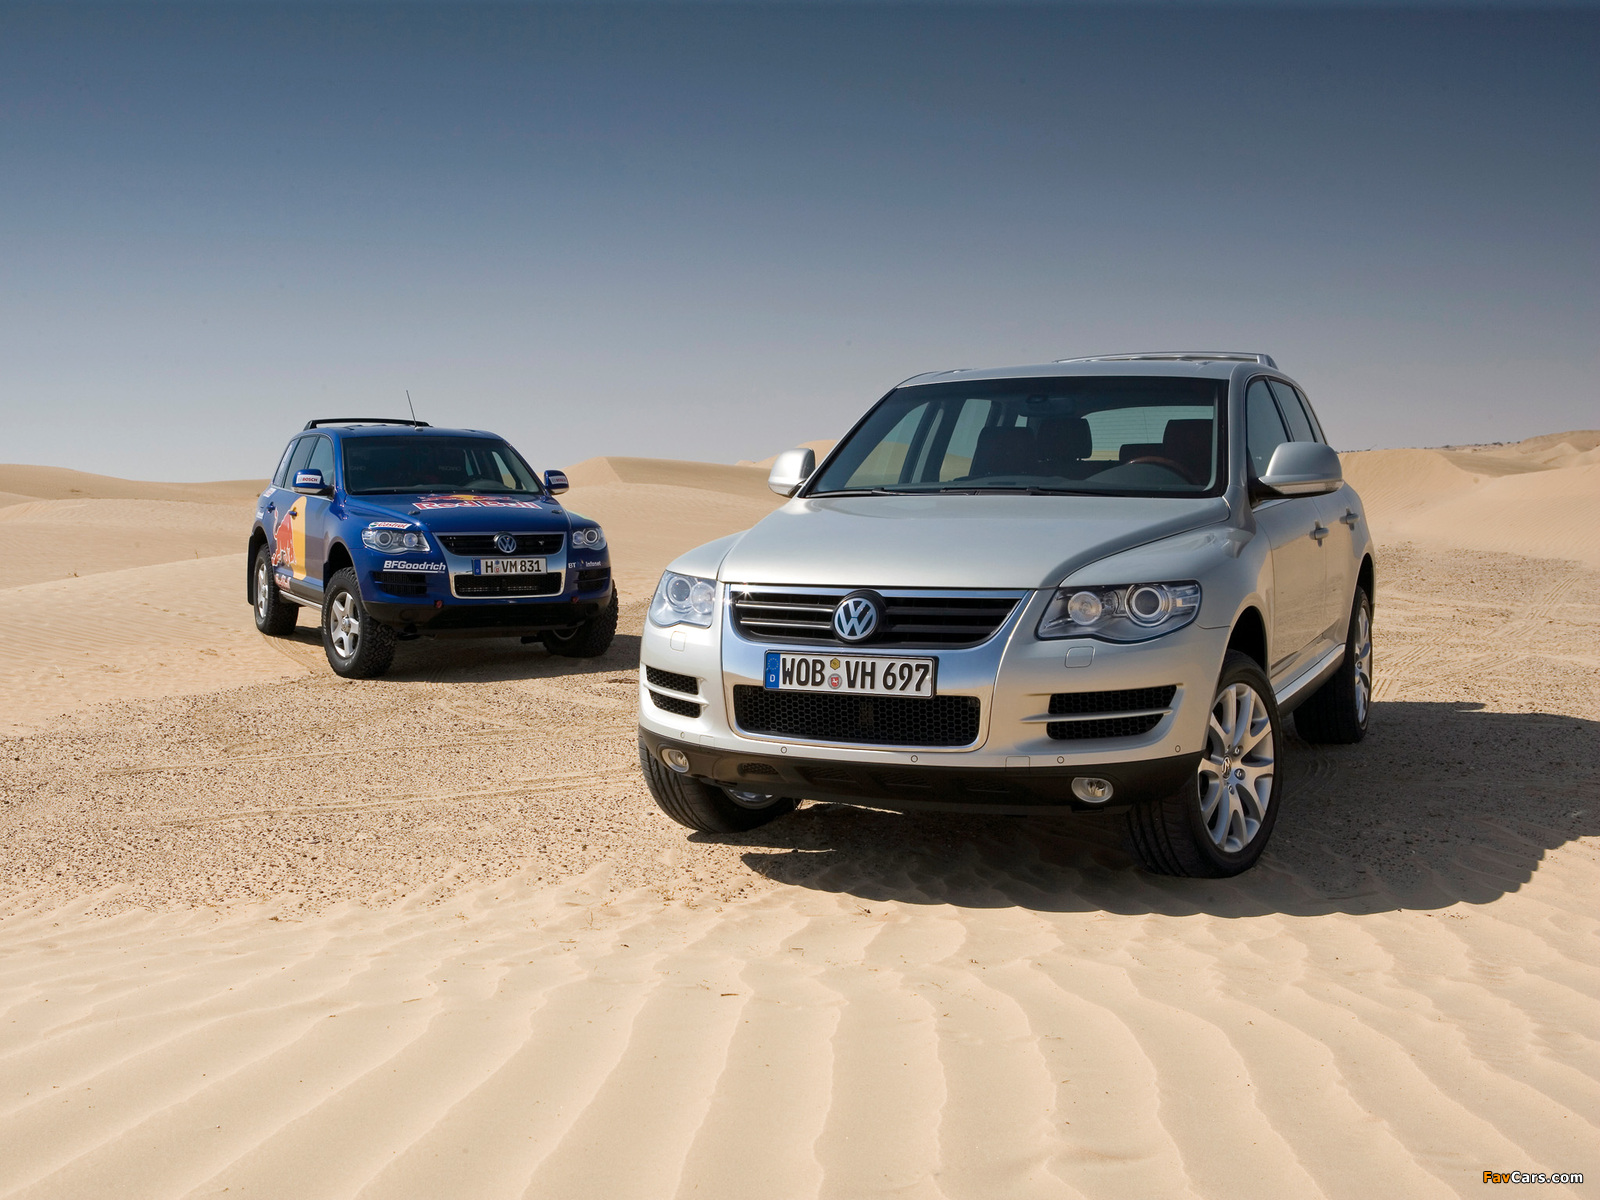 Images of Volkswagen Touareg (1600 x 1200)